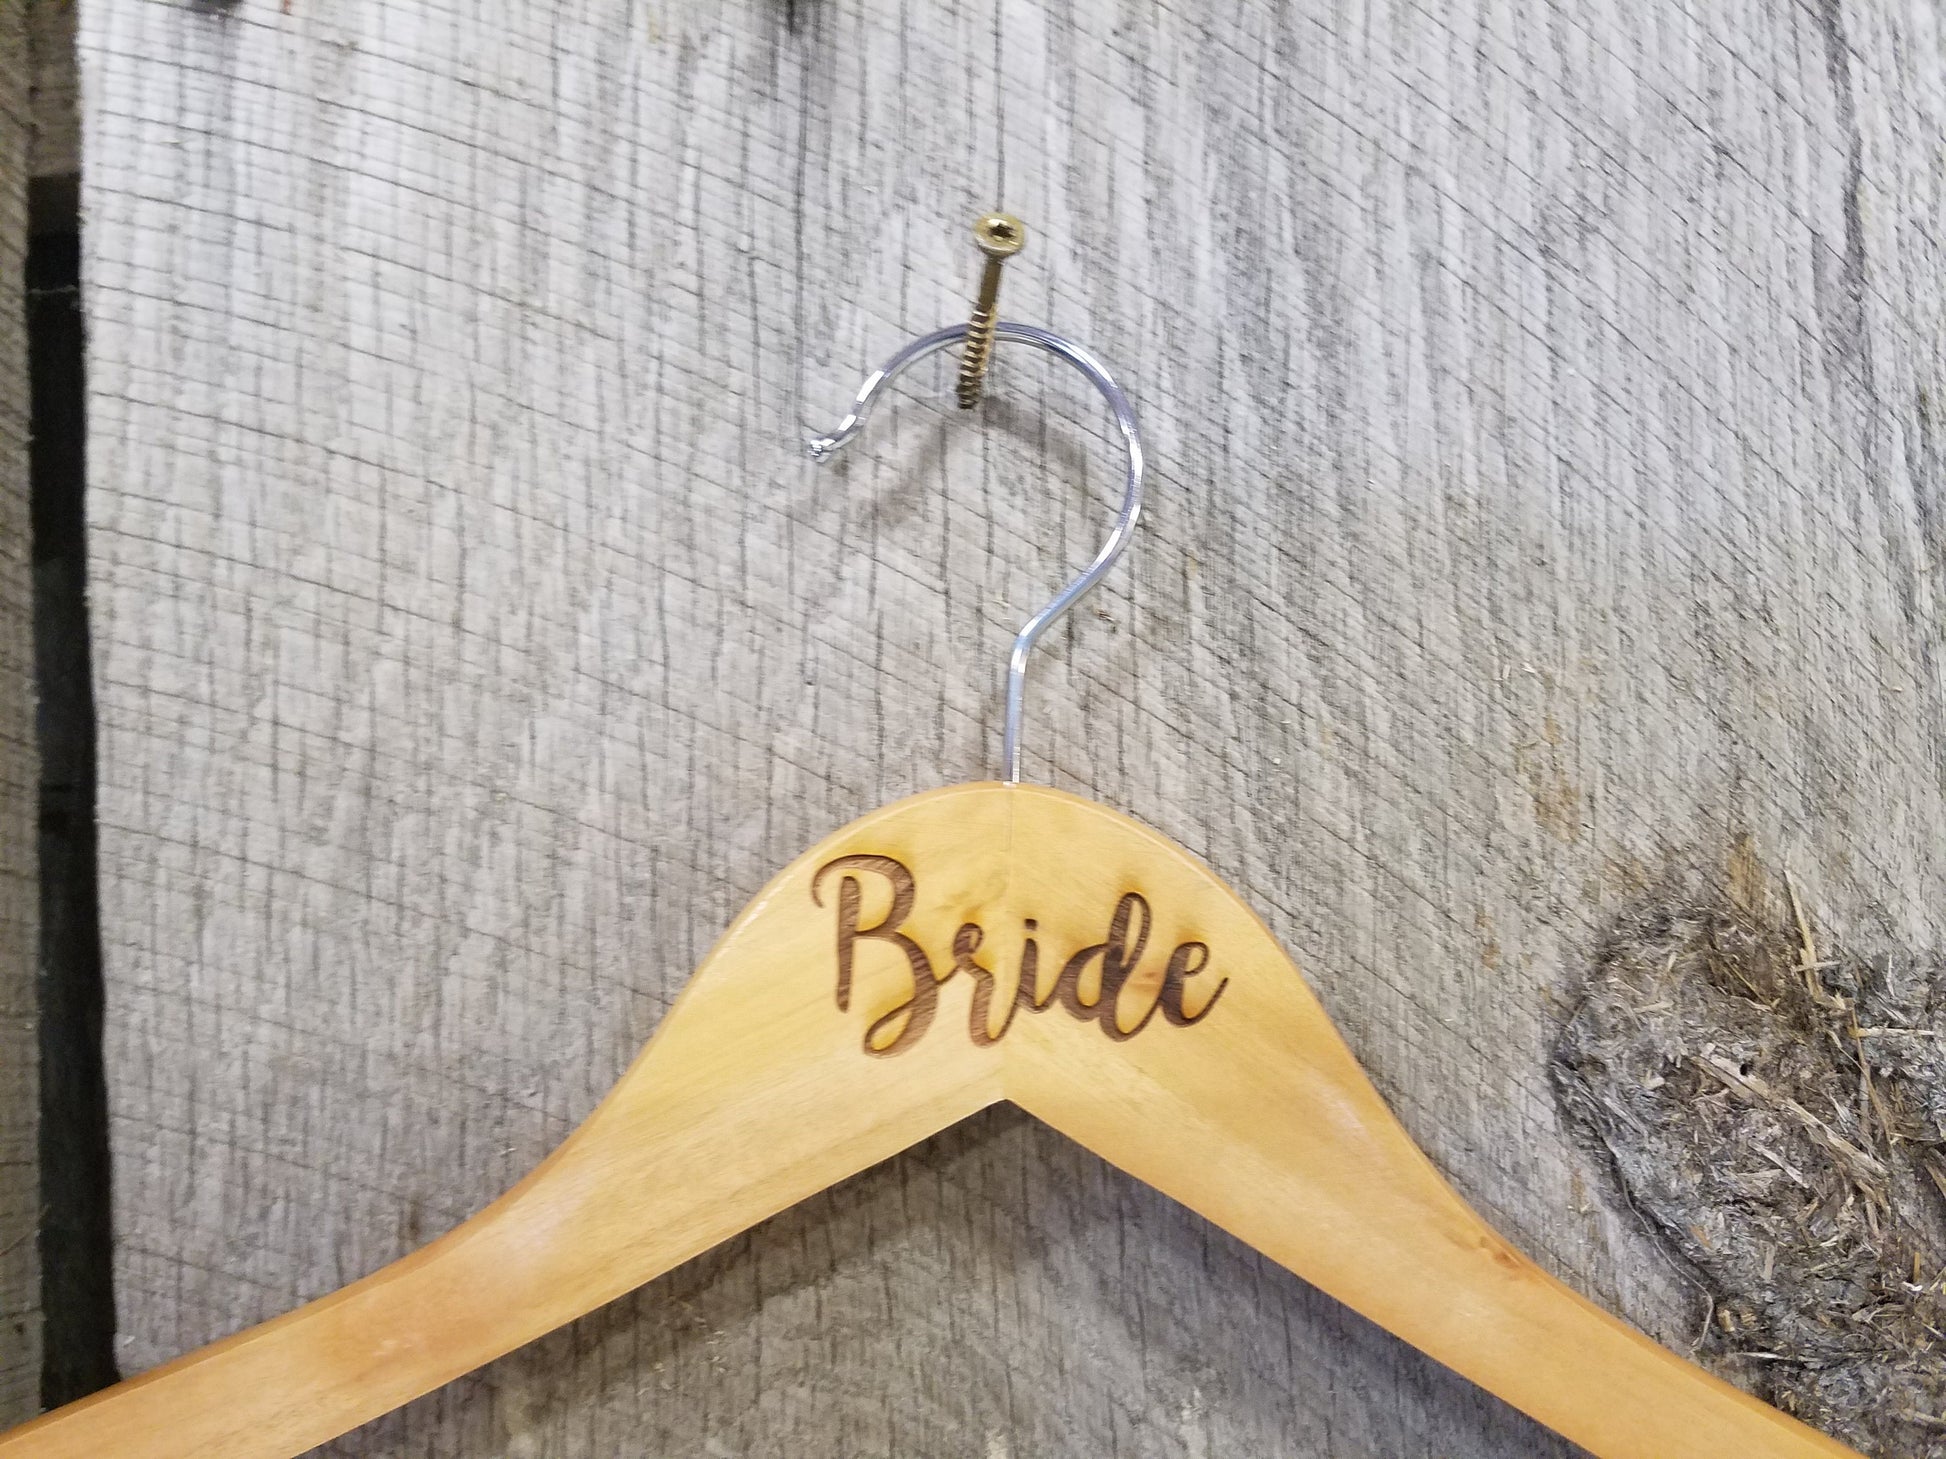 Bride Dress Clothes Hanger Bridal Party Engraved Hard Wood Coat Sturdy Wedding Bromellow Personalized